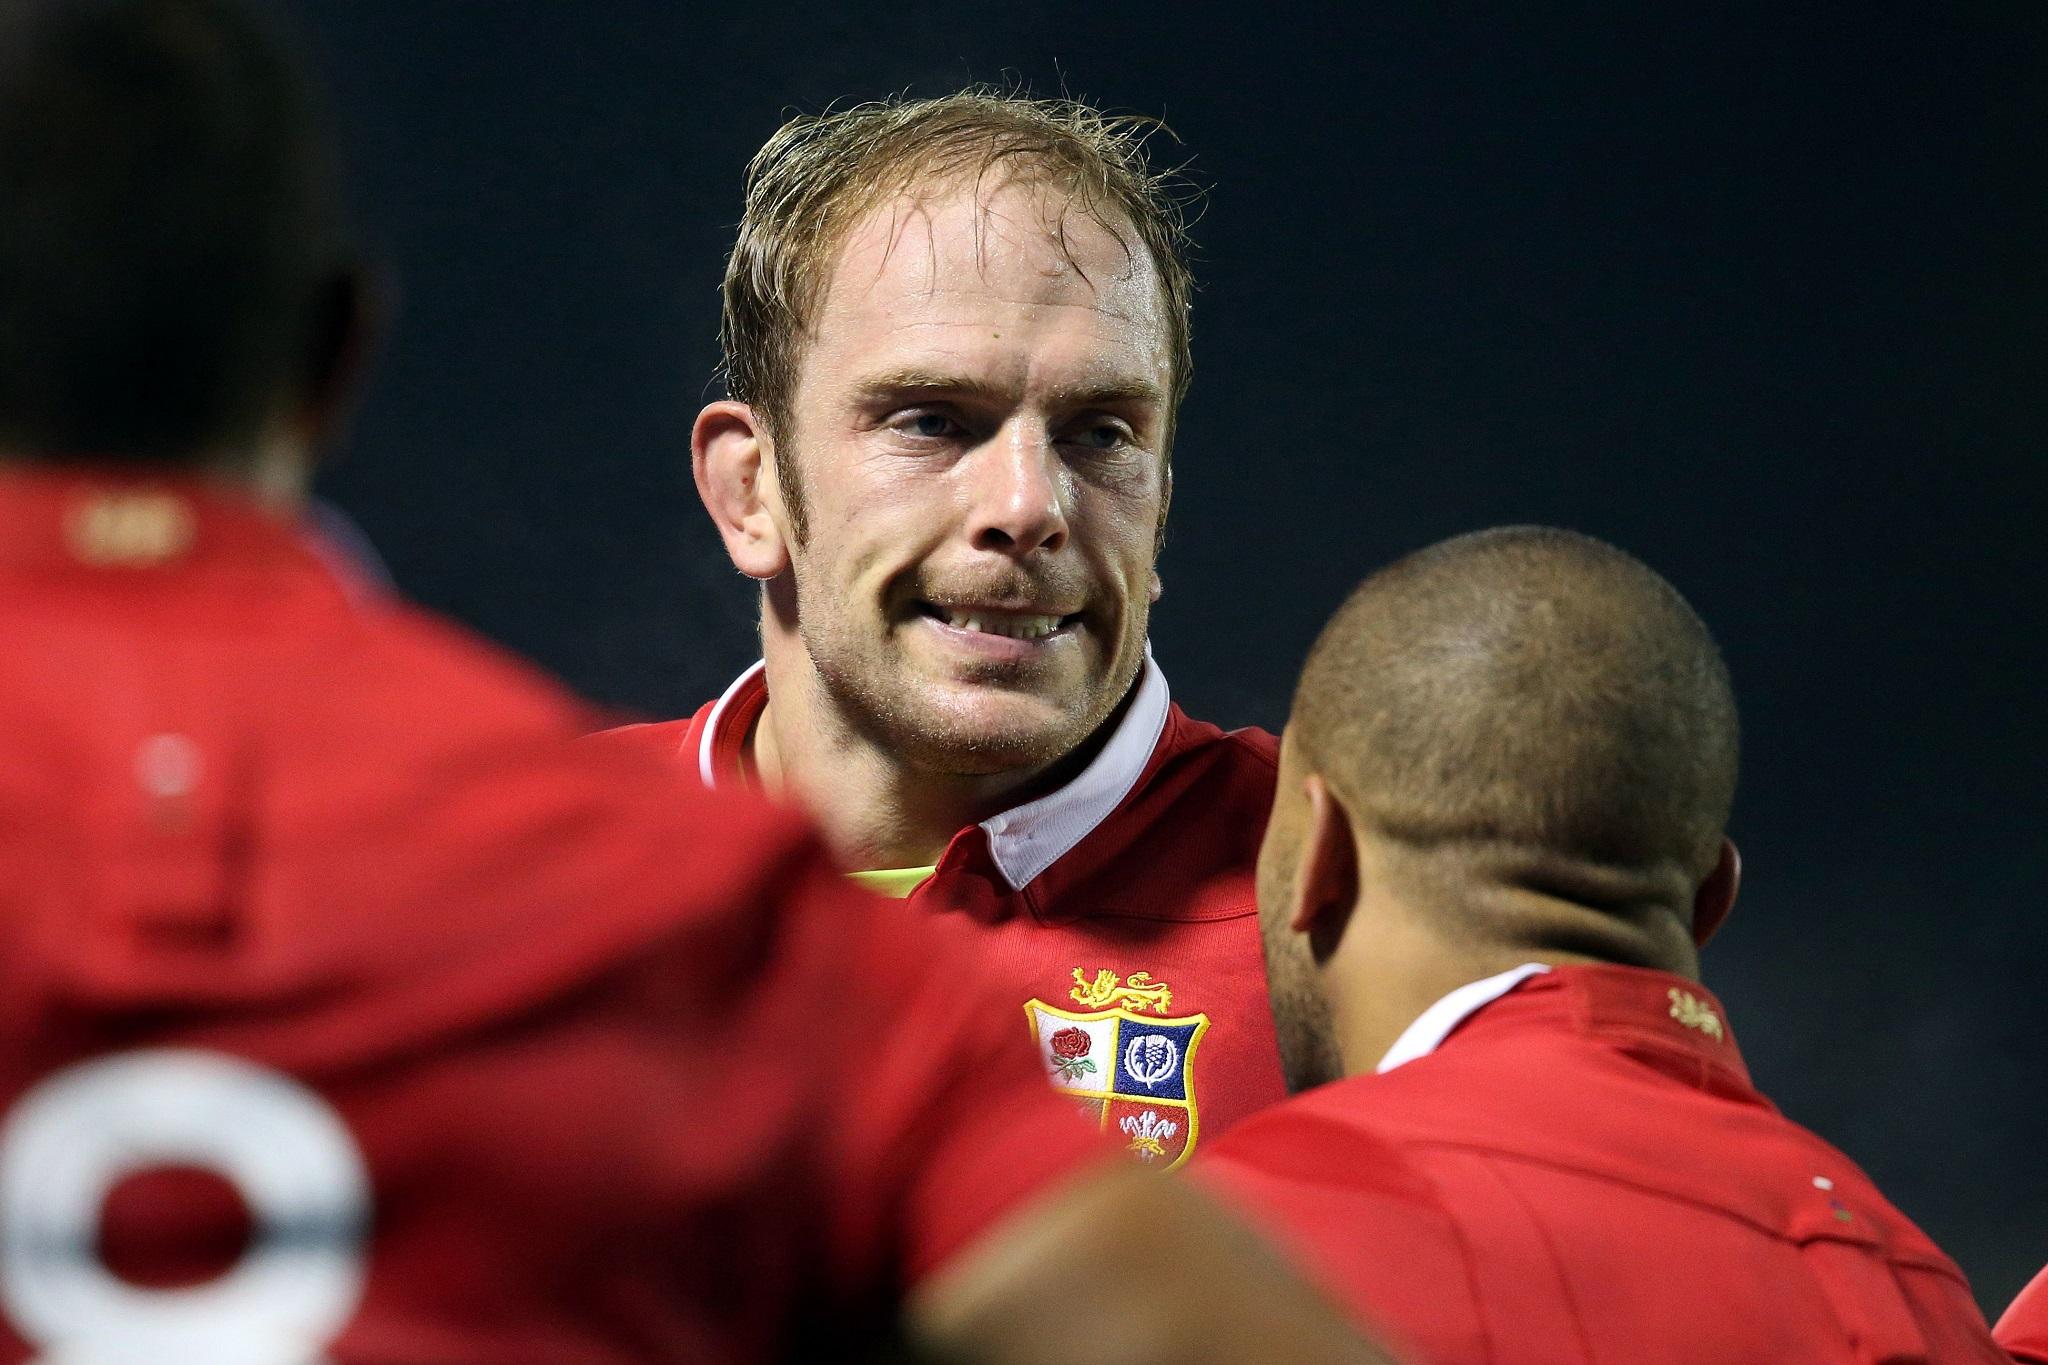 Alun Wyn Jones will captain the Lions against the Crusaders